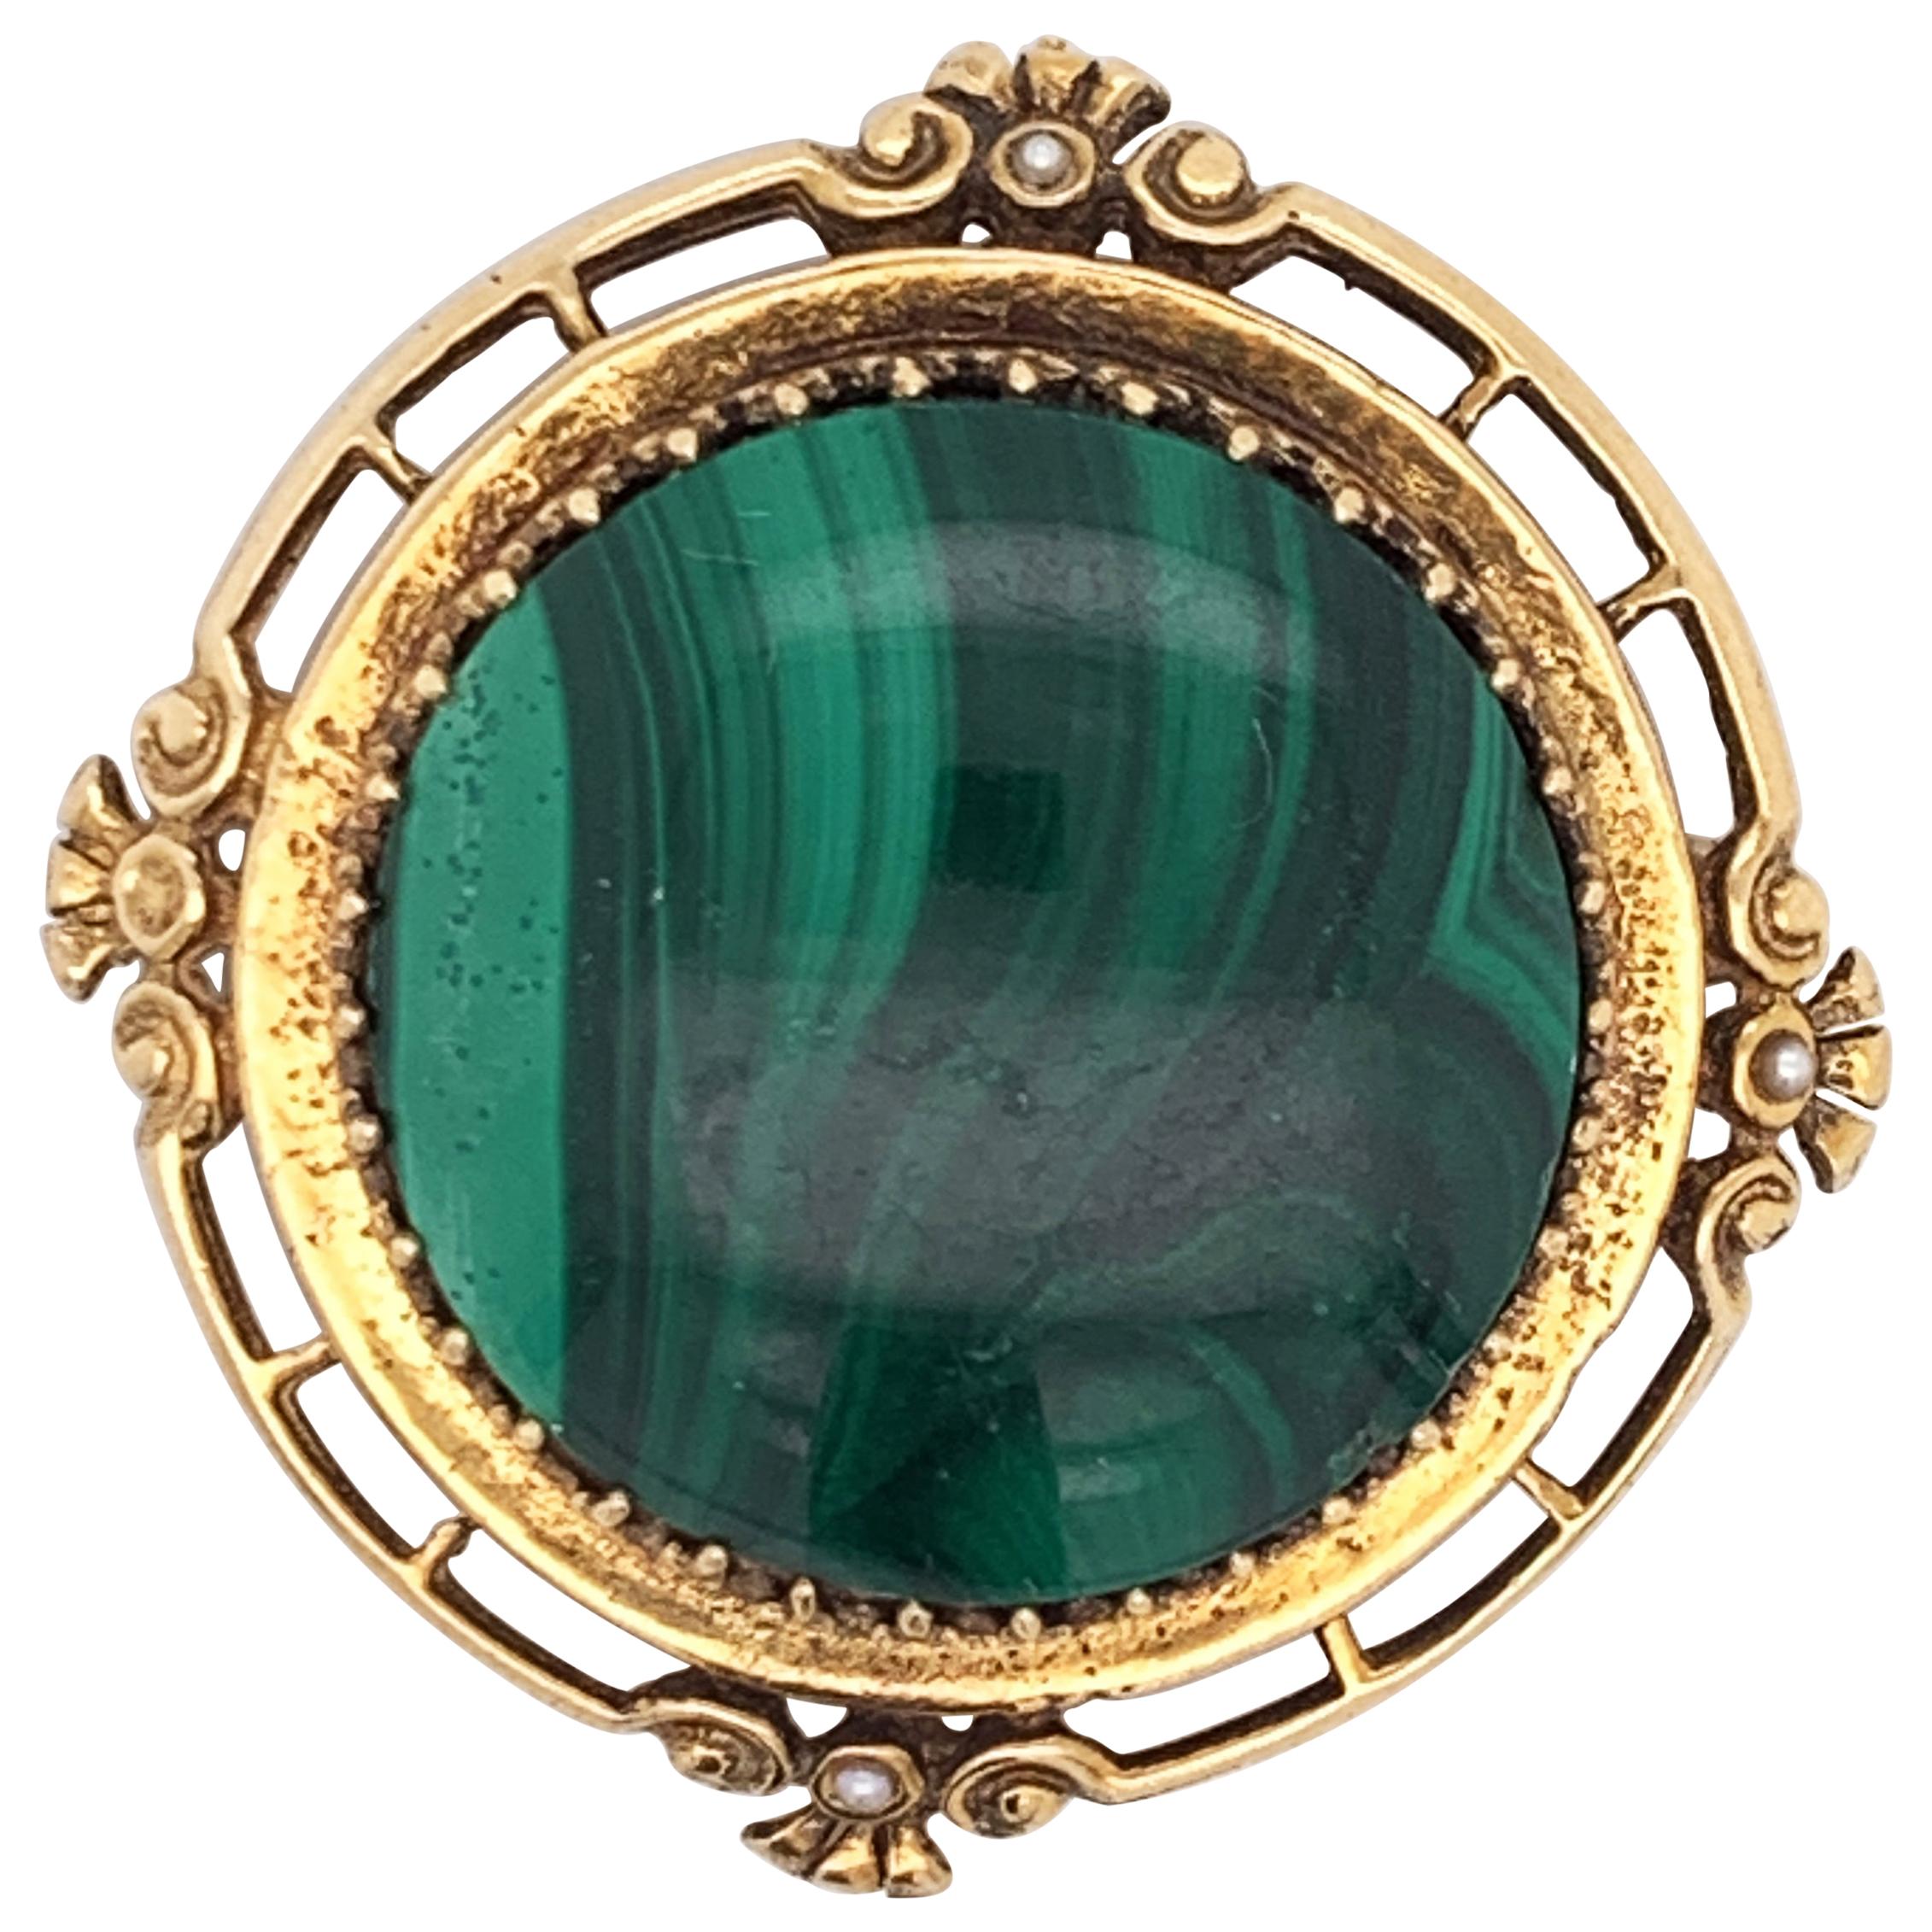 Natural Malachite Stone Brooch Framed in 14 Karat Yellow Gold With Accent Pearls